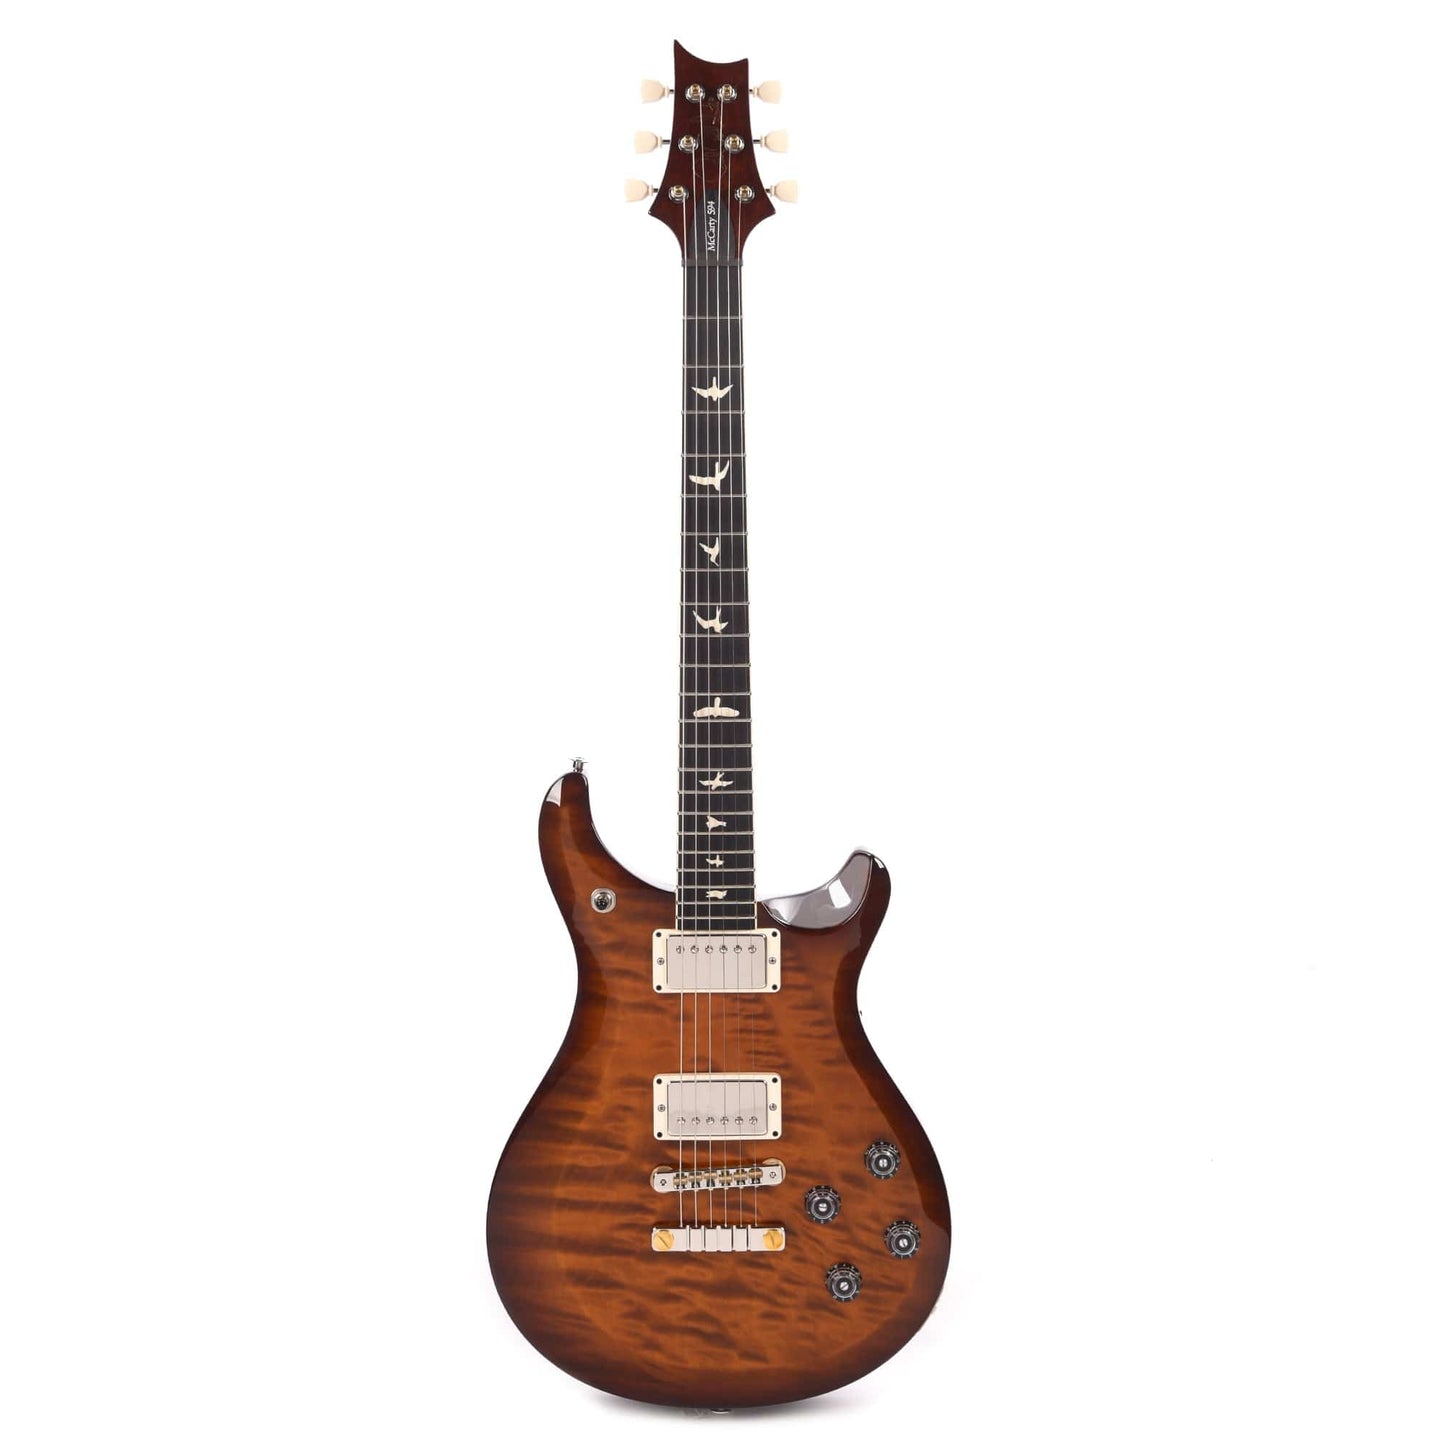 PRS Special Run S2 McCarty 594 Quilt Top Violin Amber Sunburst w/Ebony Fingerboard Electric Guitars / Solid Body